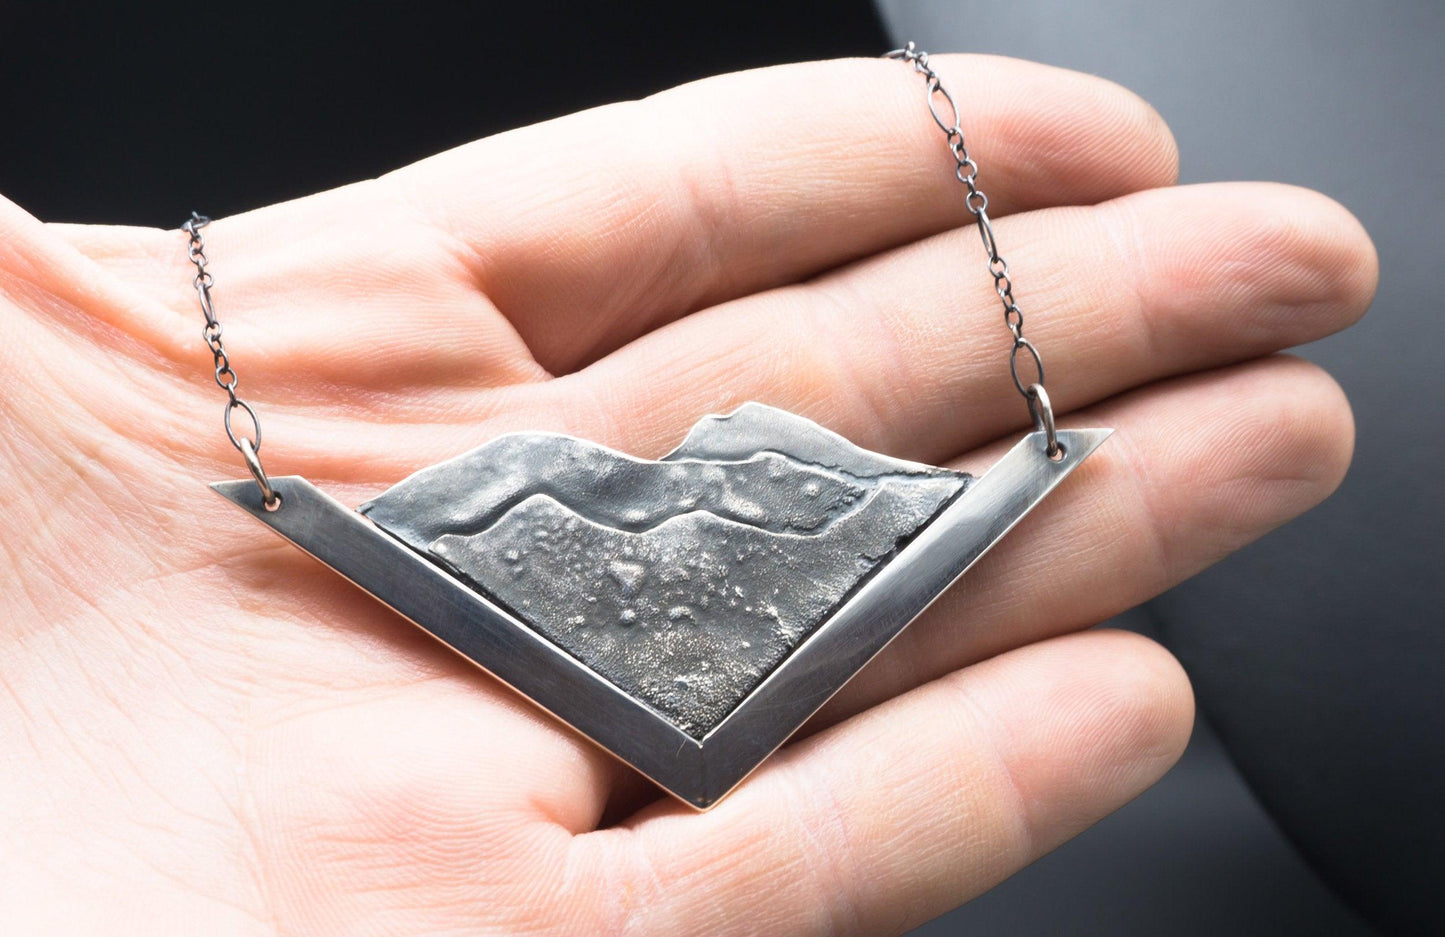 Mountain Landscape Pendant | .925 Sterling Silver | Hand fabricated | One of a kind necklace with 24" Chain - Ecotone Jewelers